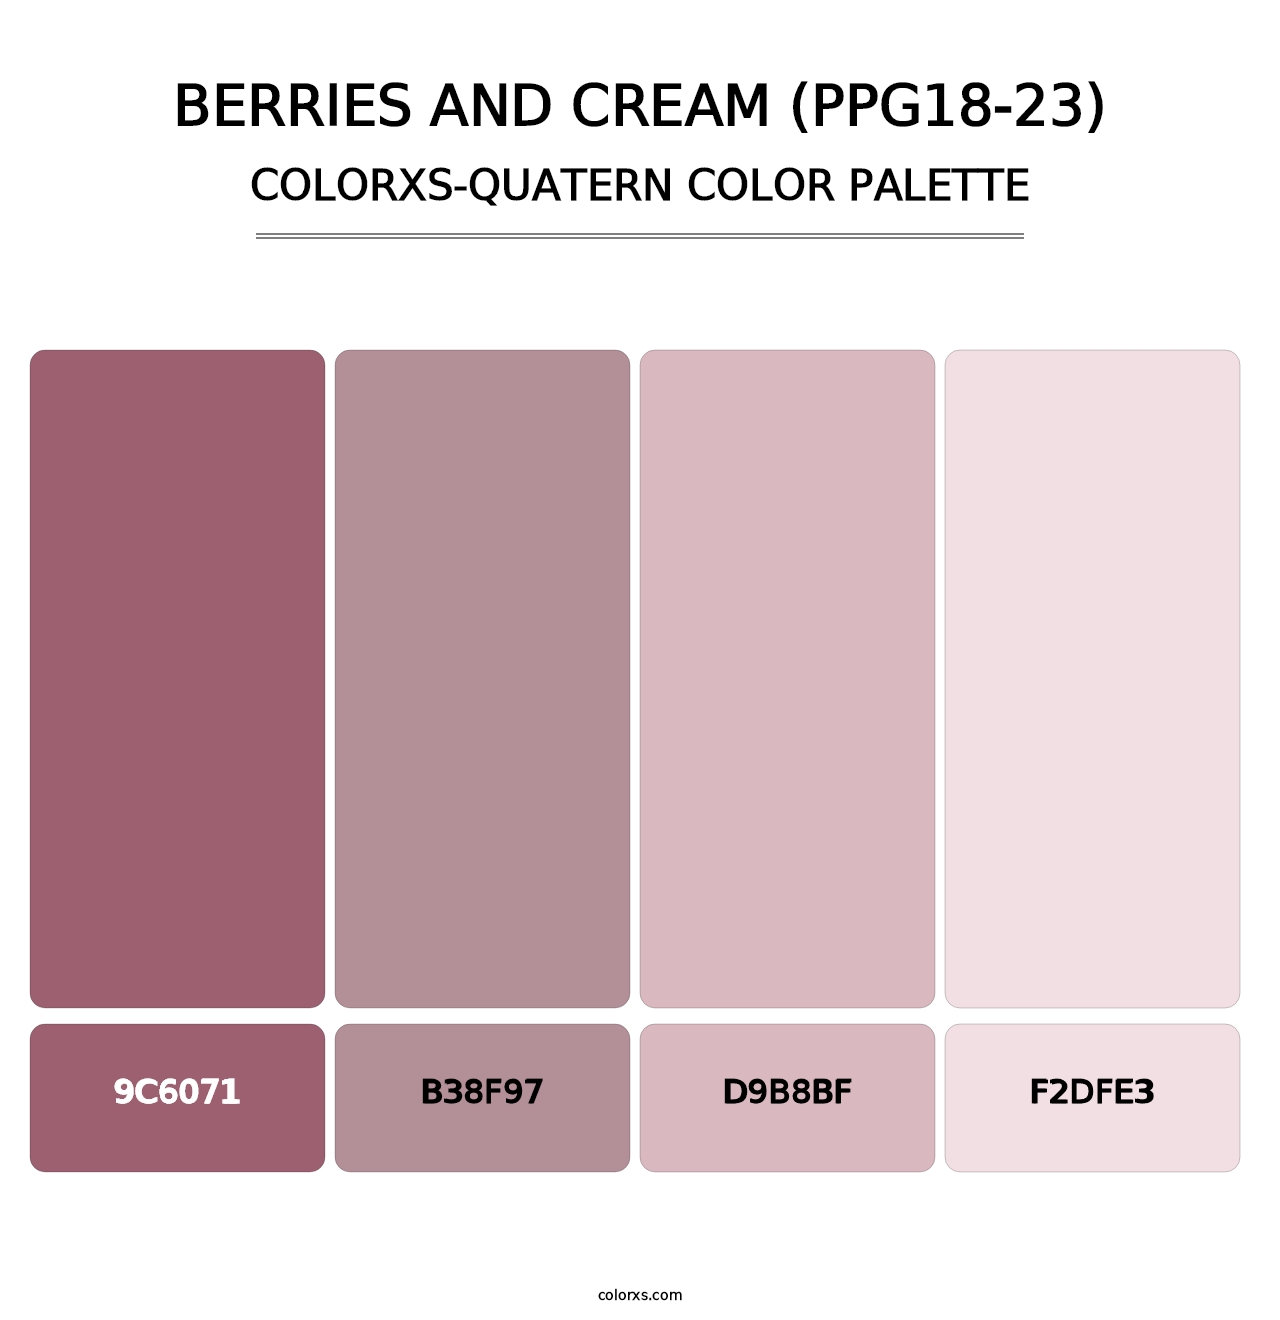 Berries And Cream (PPG18-23) - Colorxs Quatern Palette